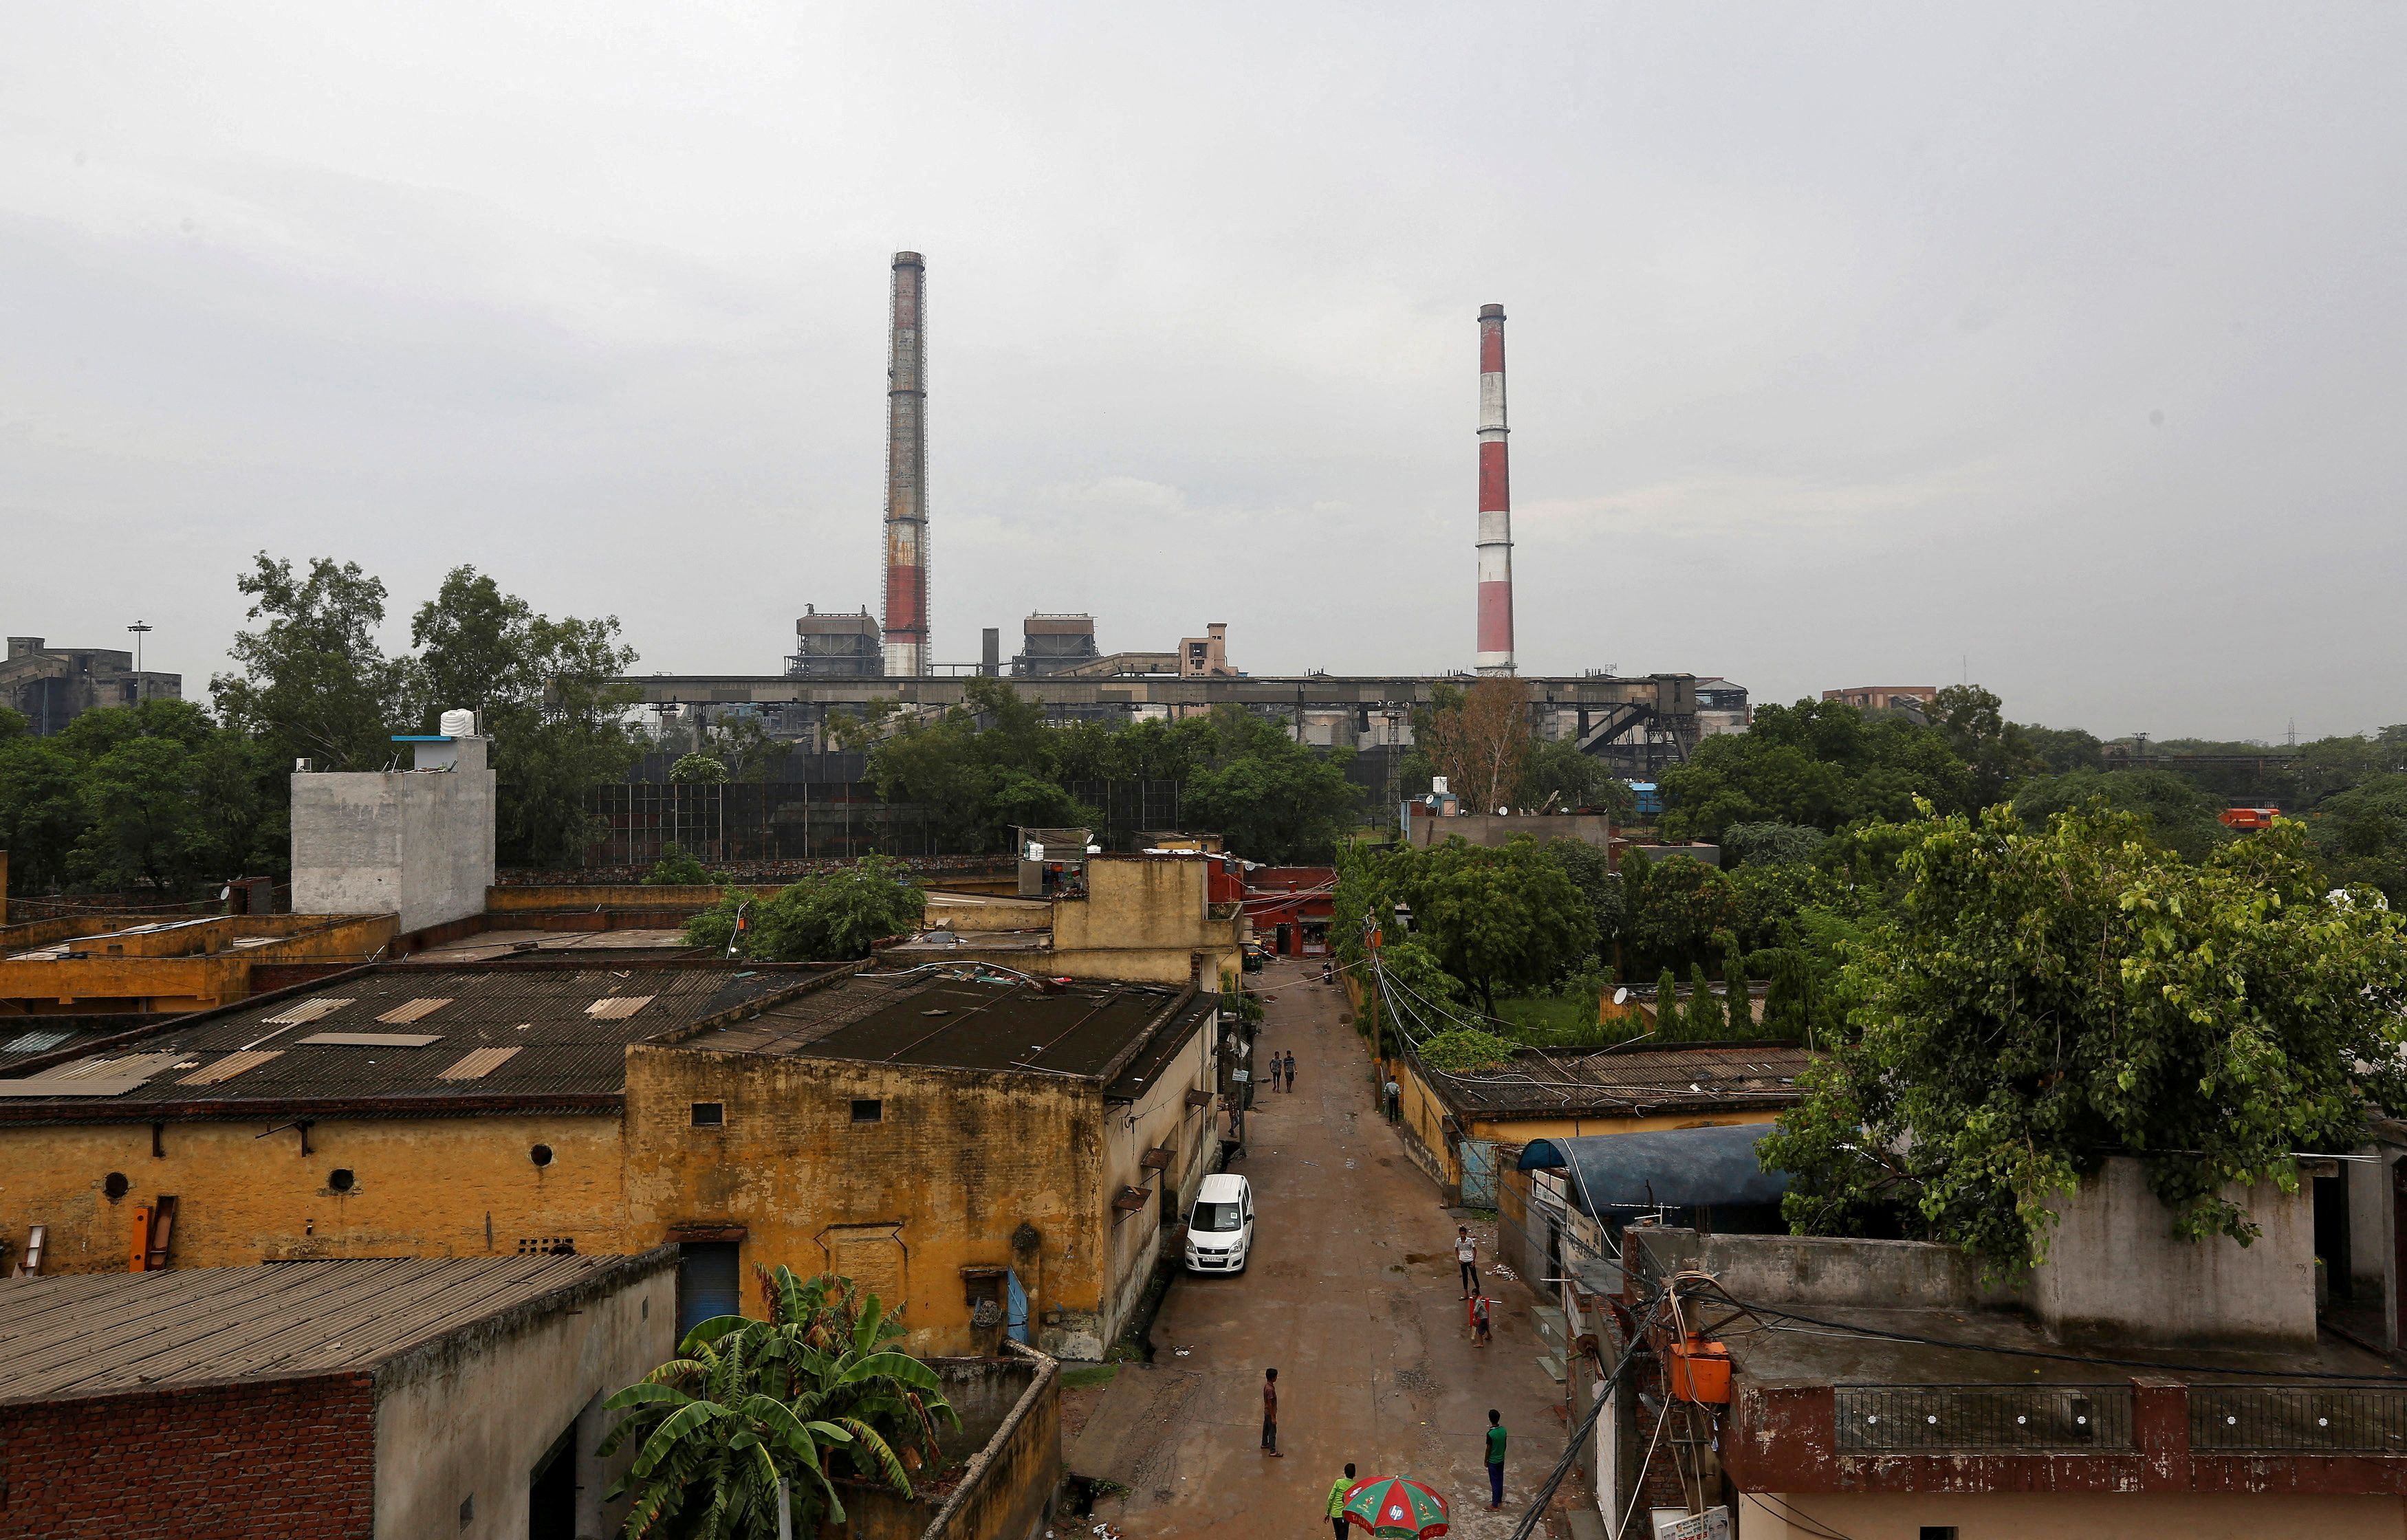 Chimneys of a coal-fired power plant are pictured in New Delhi, India